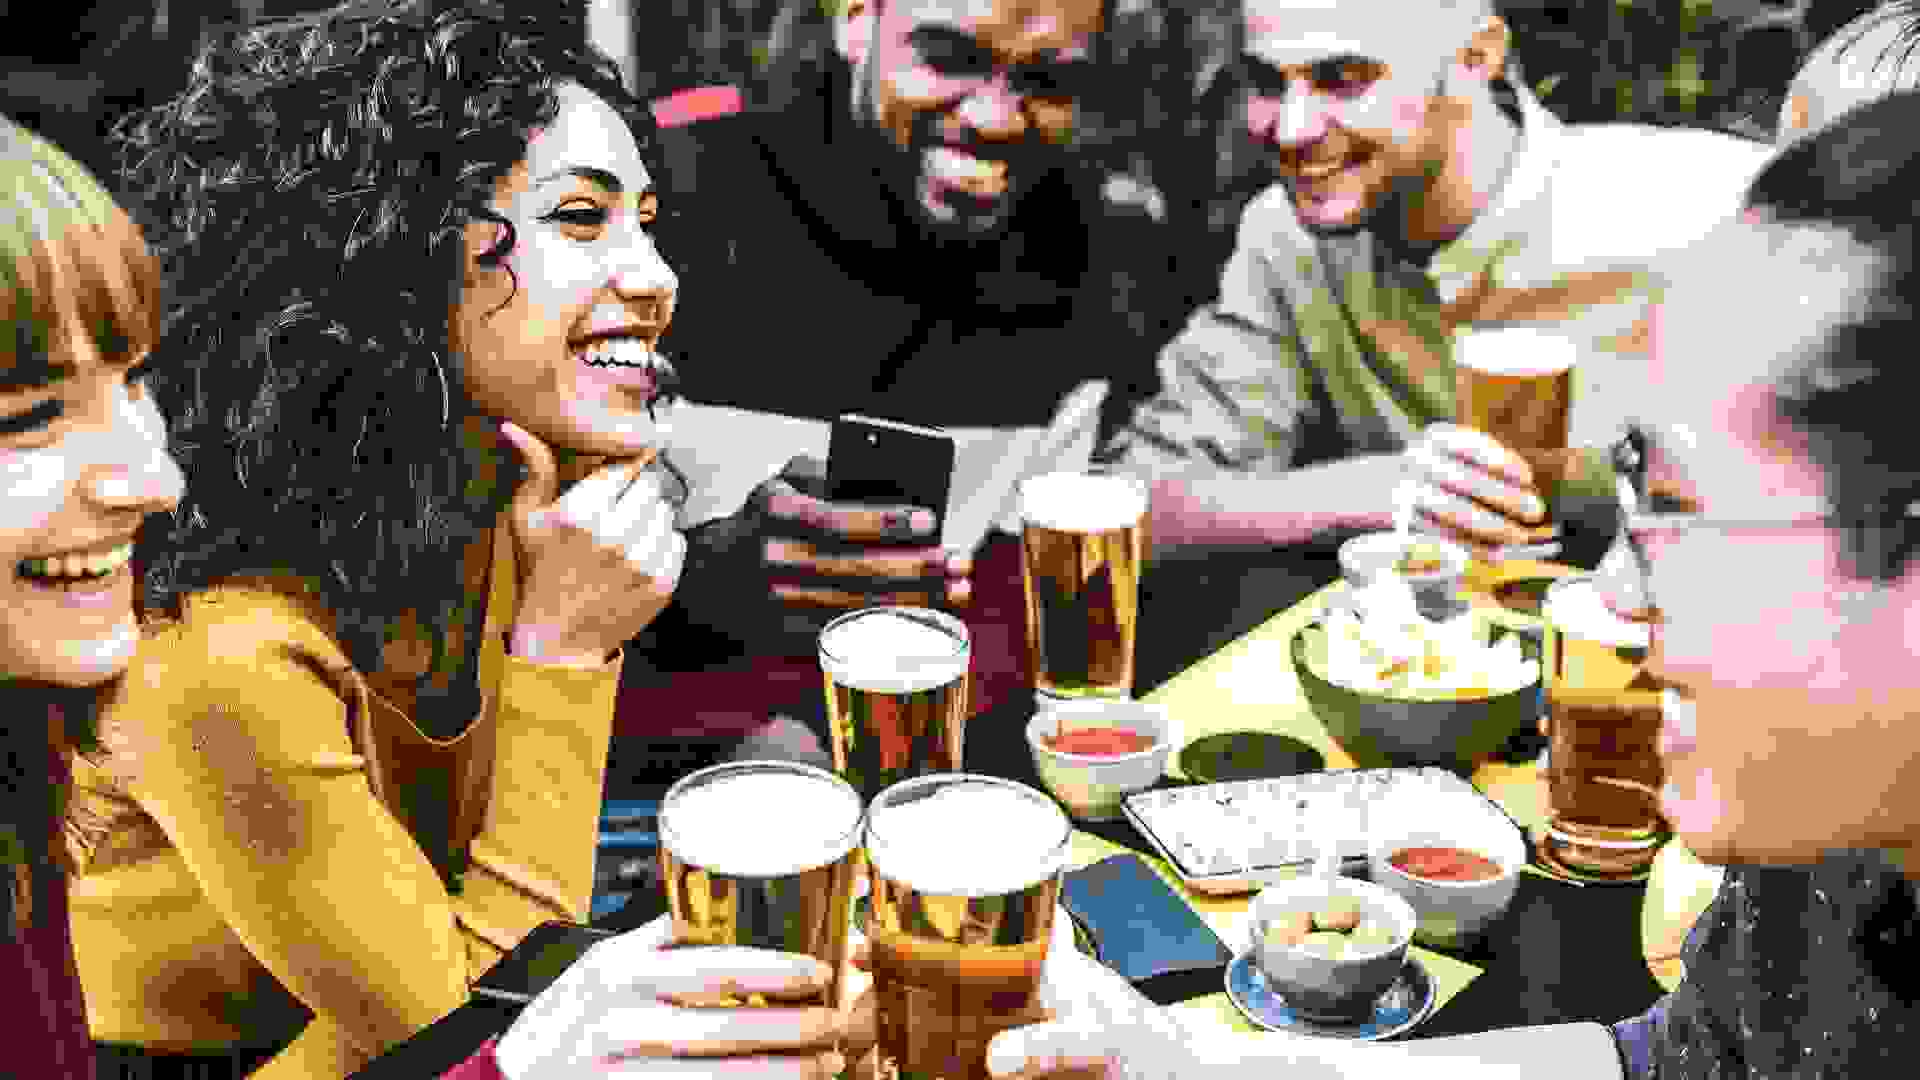 Happy diverse friends drinking beer at brewery pub - Group of young people having fun together at backyard home party - Friendship concept stock photo